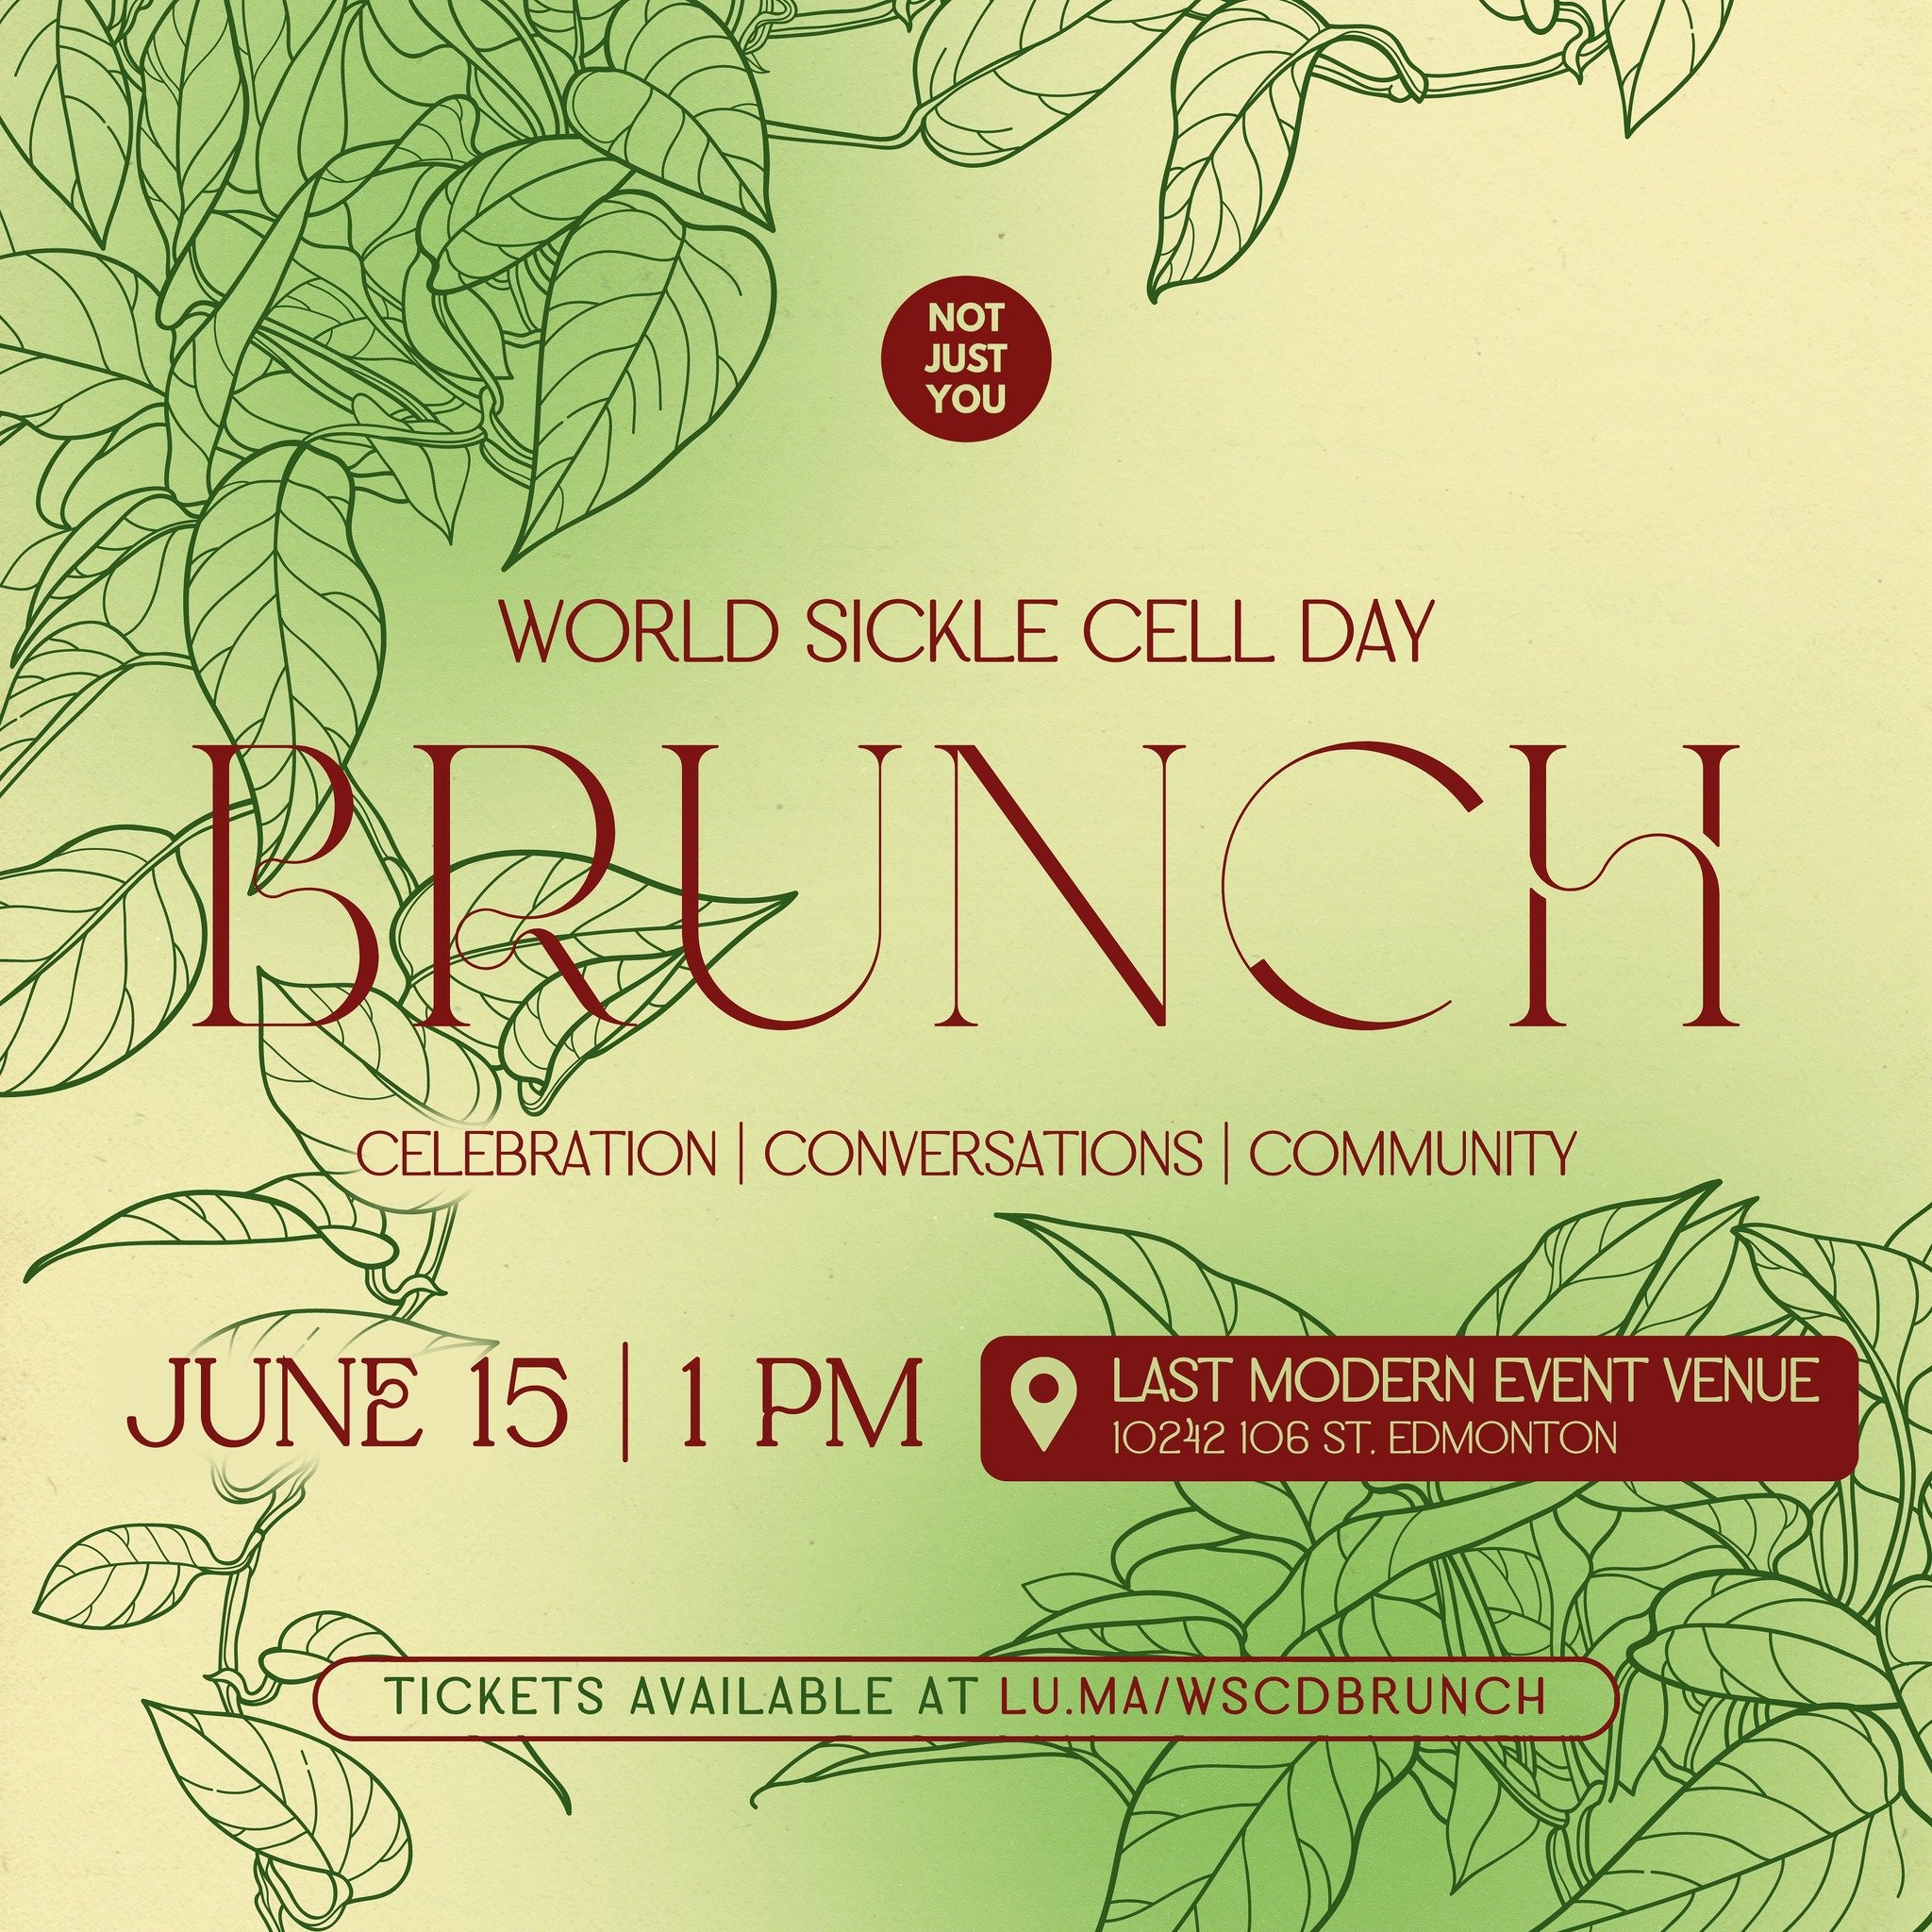 Back by popular demand! Our second annual World Sickle Cell Day Brunch is here, and it&rsquo;s going to be bigger and better than ever. 🌱

Don&rsquo;t miss out on a day filled with brunch delights and community connections. See you there!

LIMITED S